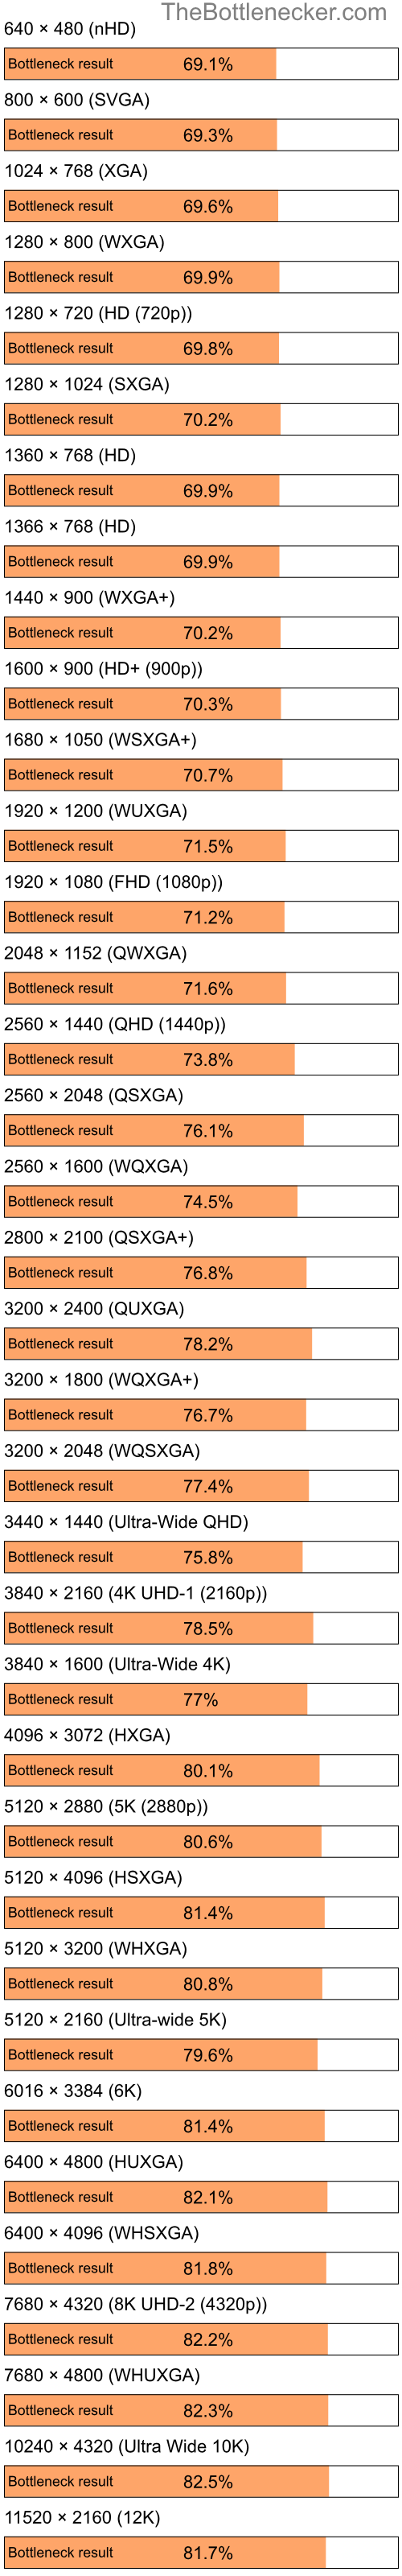 Bottleneck results by resolution for Intel Pentium 4 and AMD Radeon HD 3200 in Graphic Card Intense Tasks